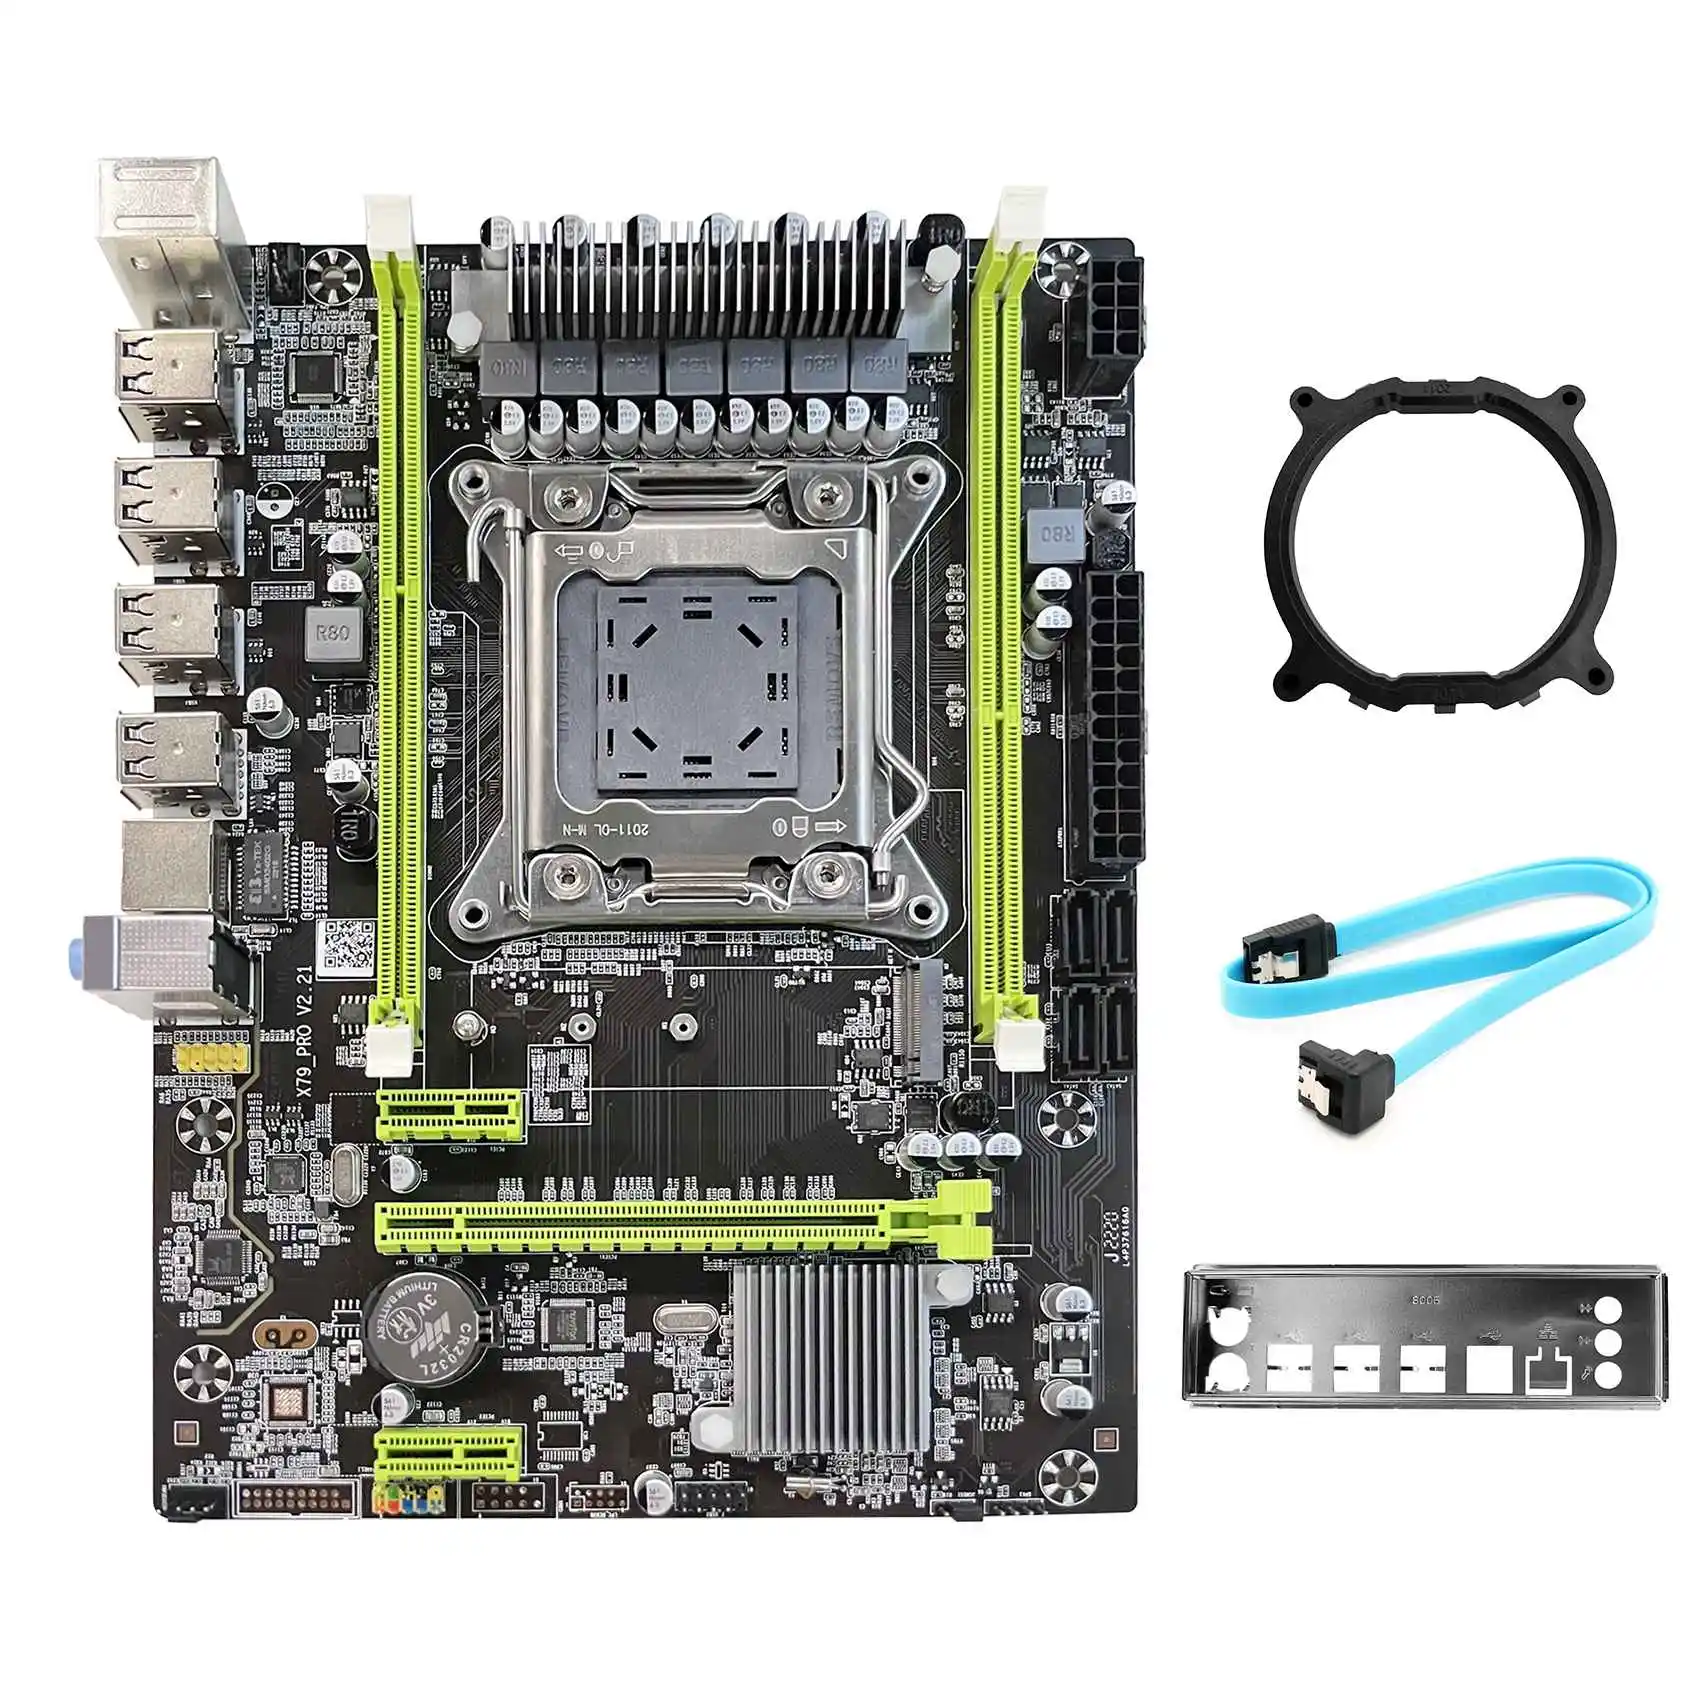 

X79 Motherboard Upgrade X79 Pro+Baffle+SATA Cable+Bracket M.2 NVME LGA2011 DDR3 Support E5-2660 2680 CPU for LOL CF PUBG